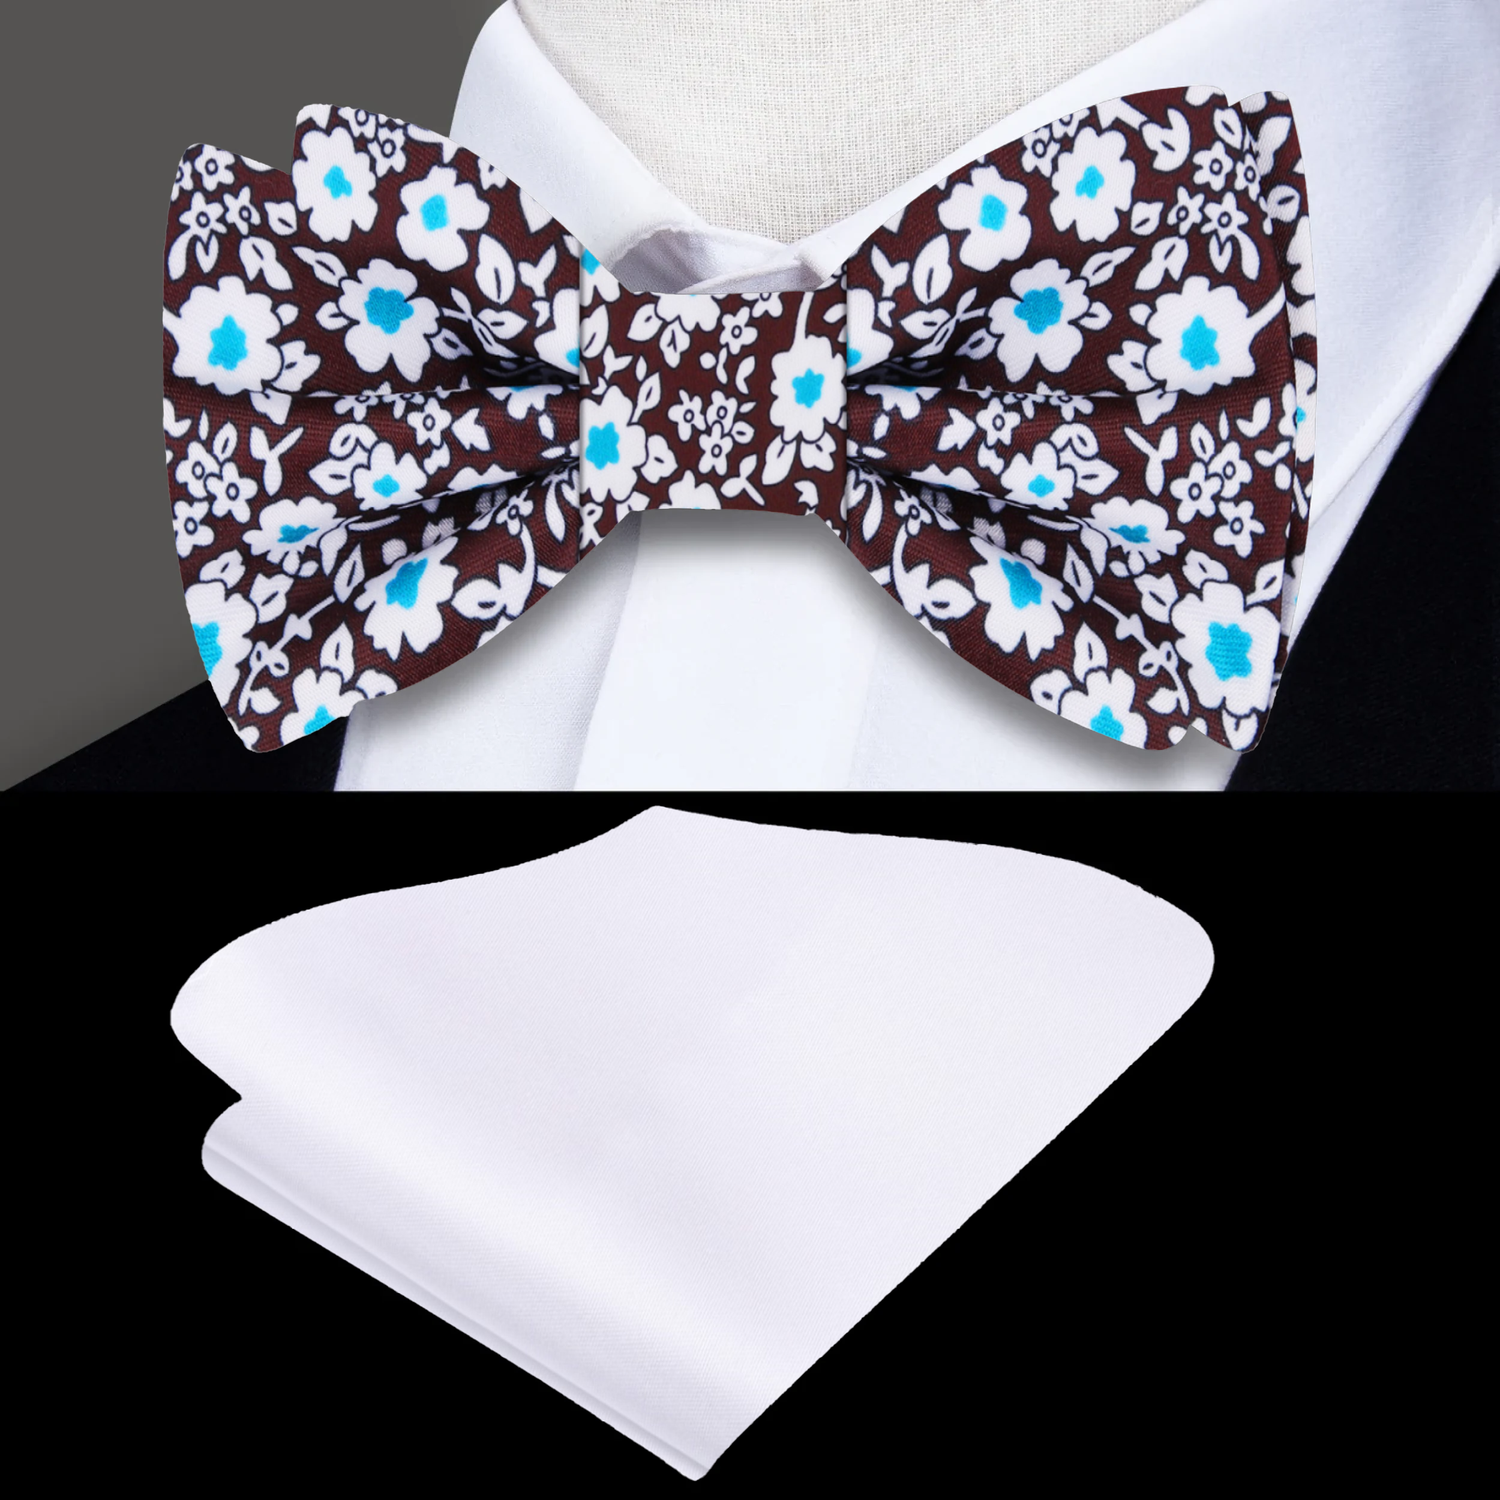 Brown, Light Blue, White Small Flowers Bow Tie and White Square